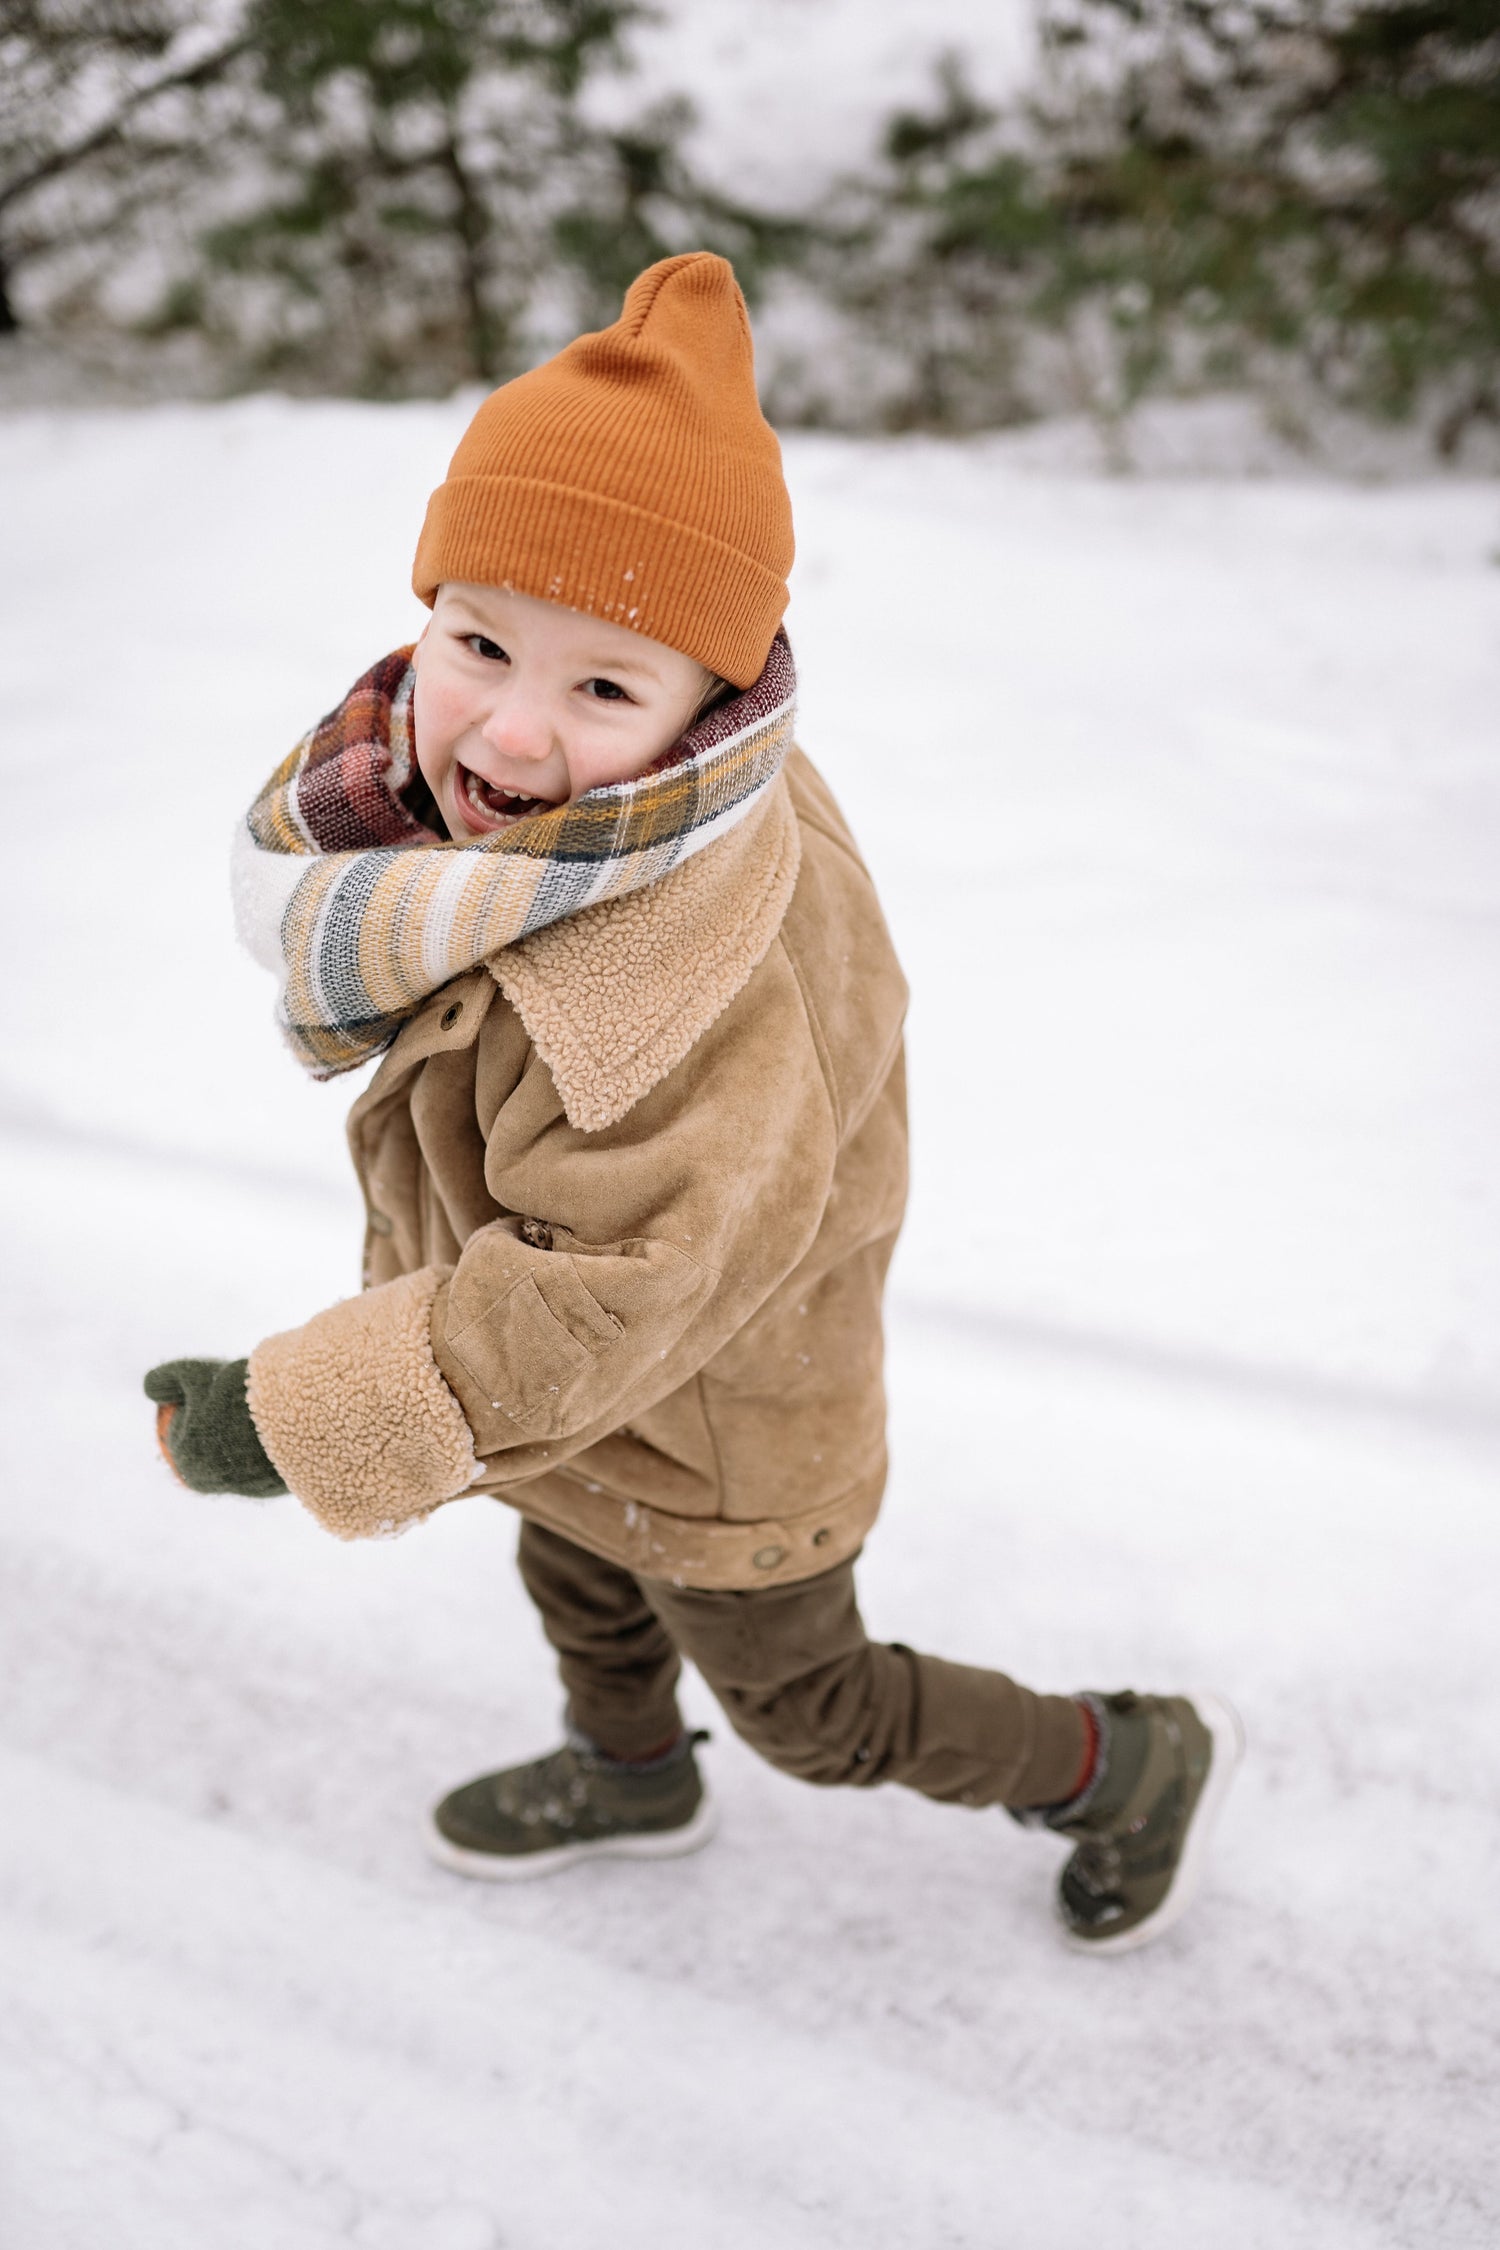 Embracing Winter Wellness: The Crucial Role of Vitamin D3 for Kids